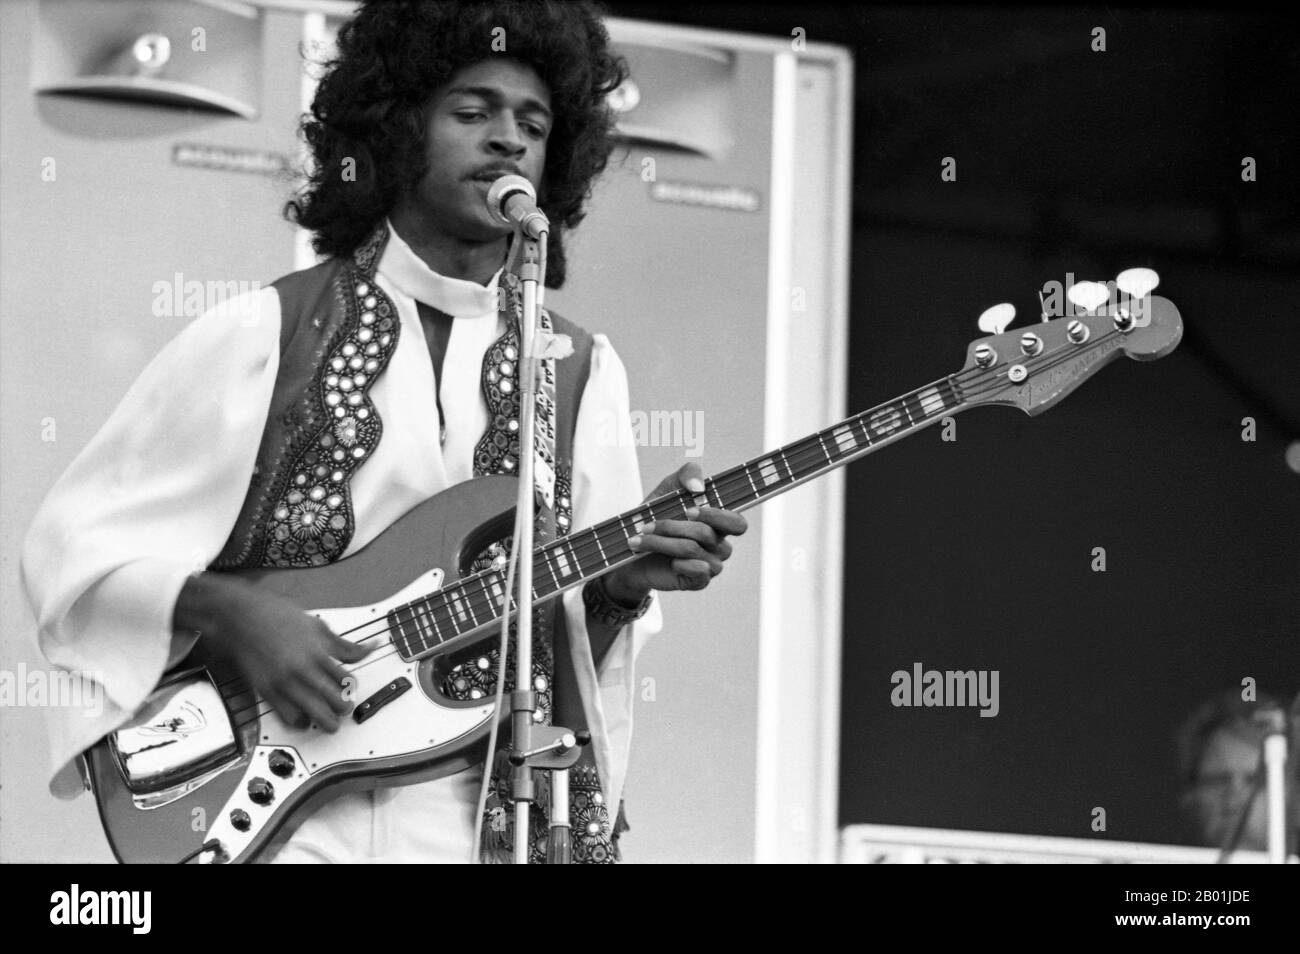 The group Sly and the Family Stone during the famous Isle of Wight festival in 1970, it is estimated that between 600 and 700,000 people attended. Saturday 29 August 1970 Stock Photo